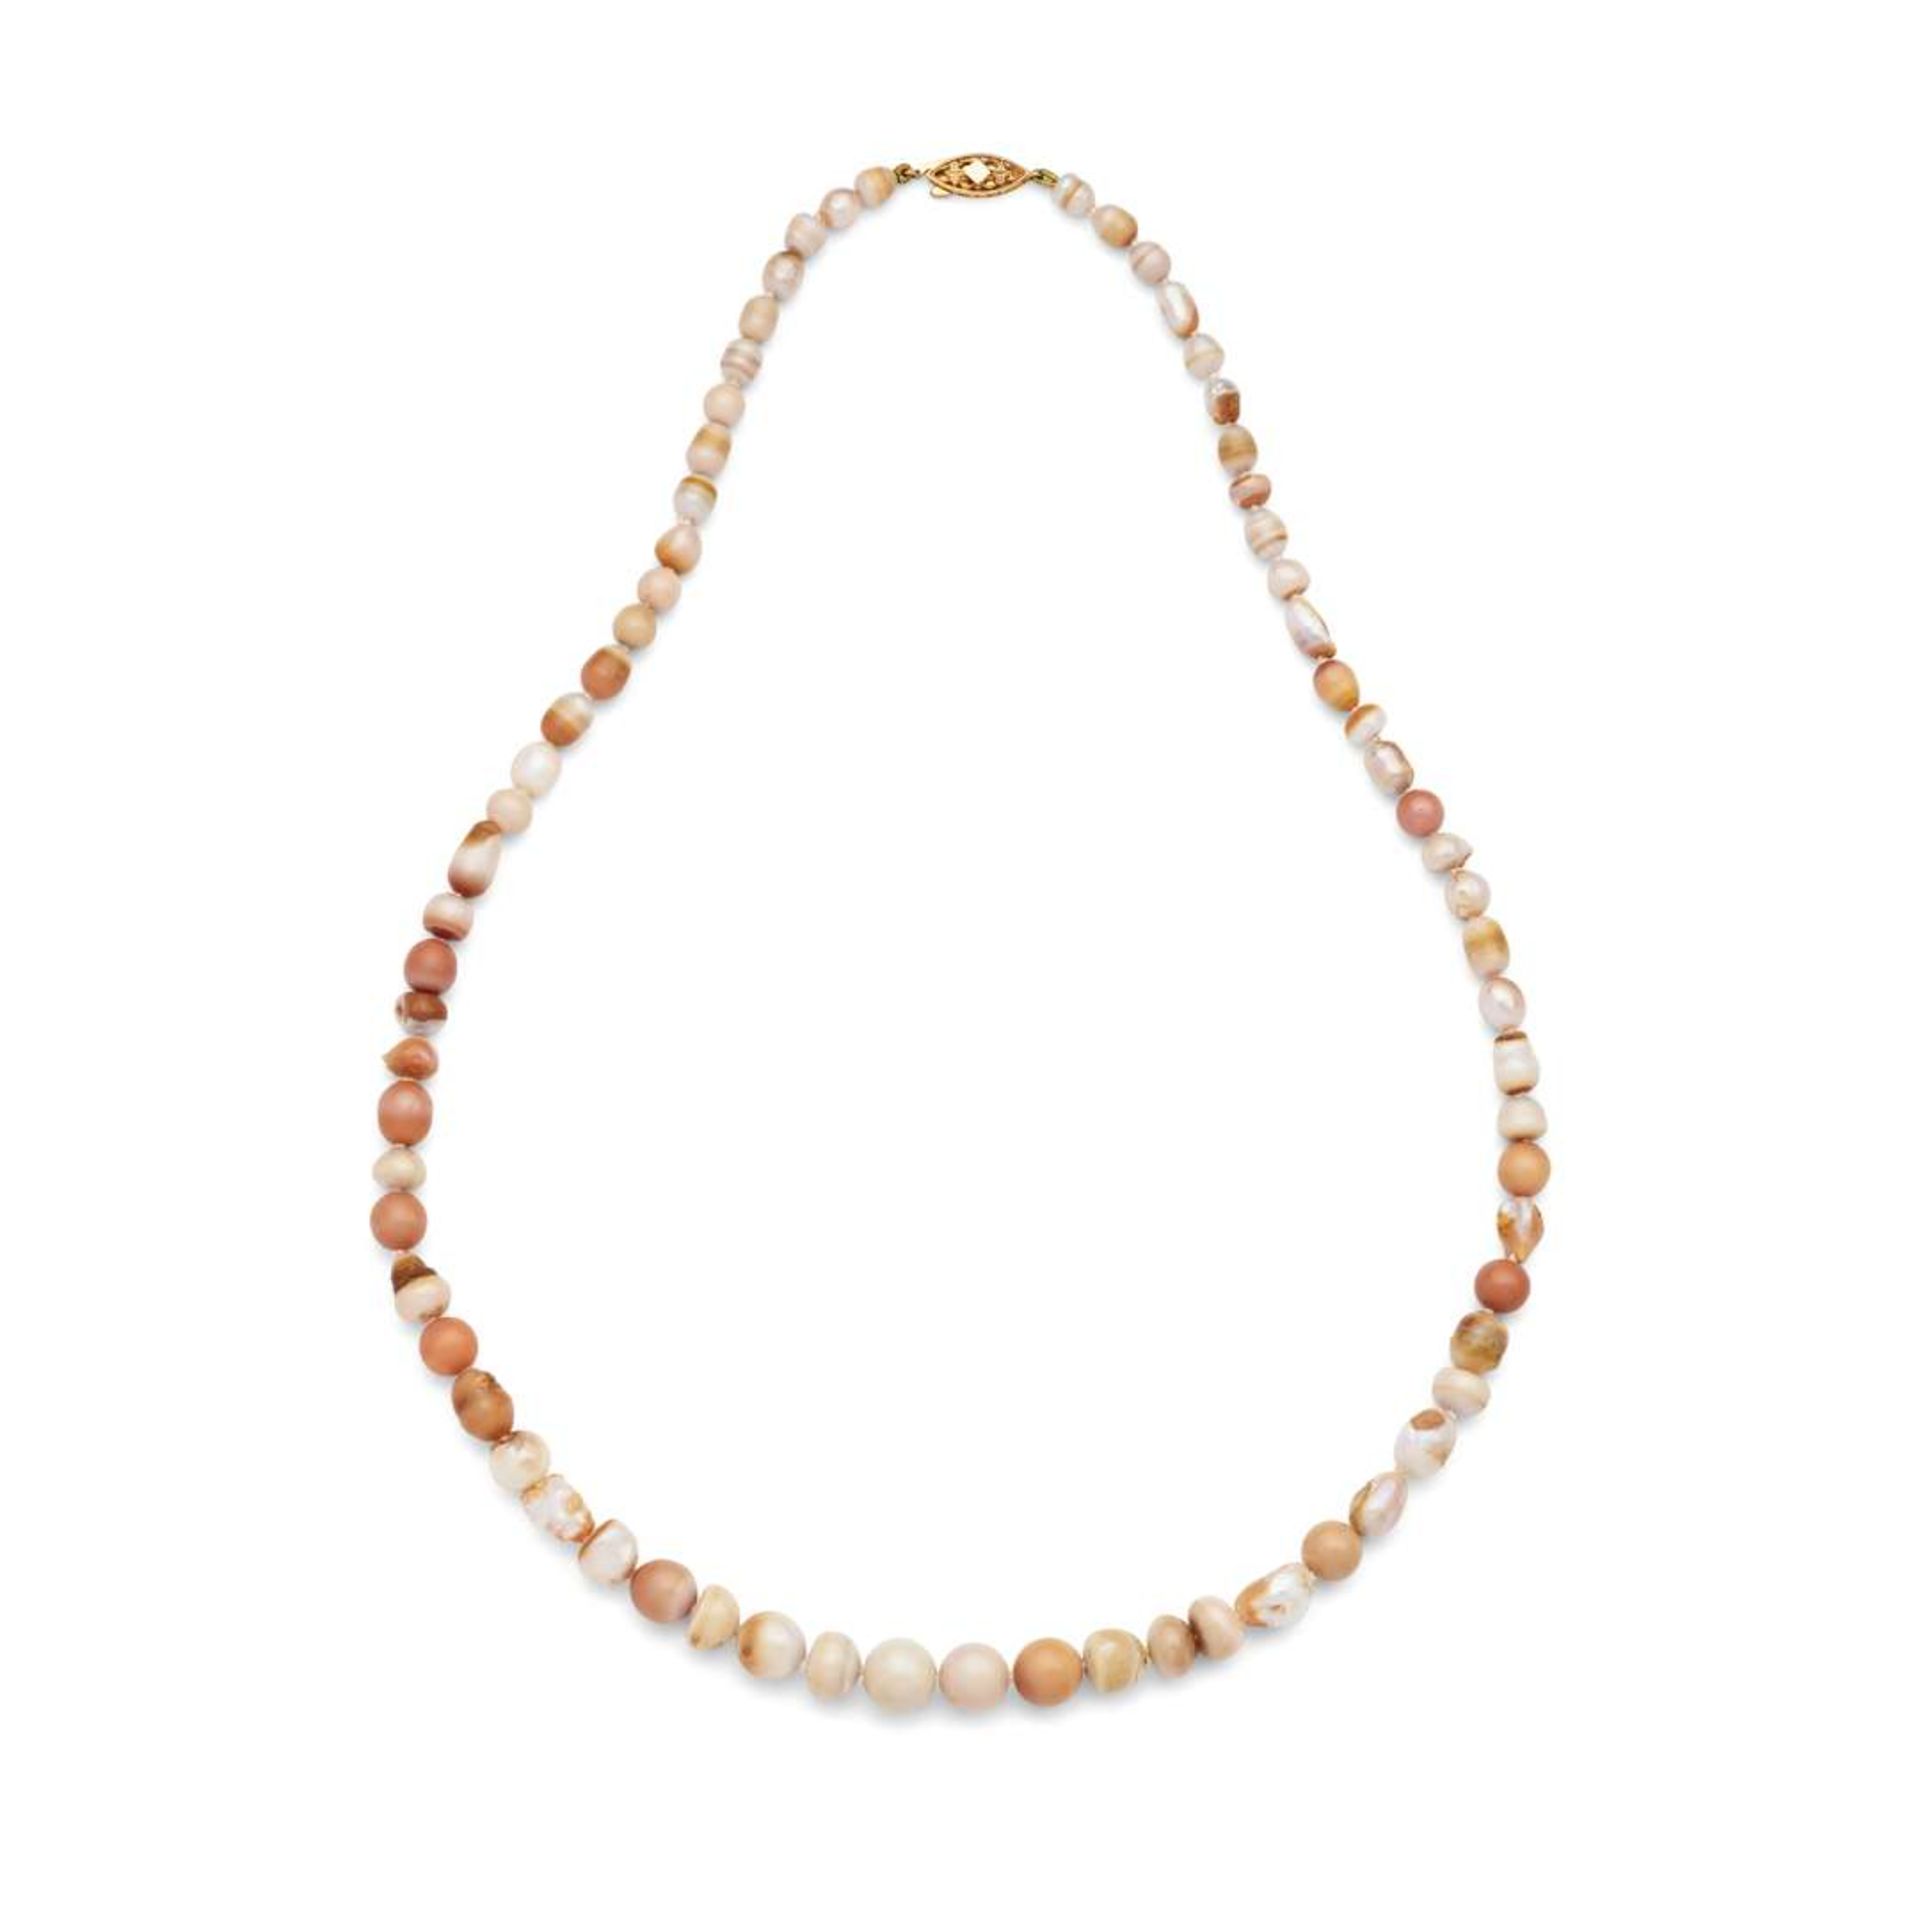 A Scottish Freshwater pearl necklace